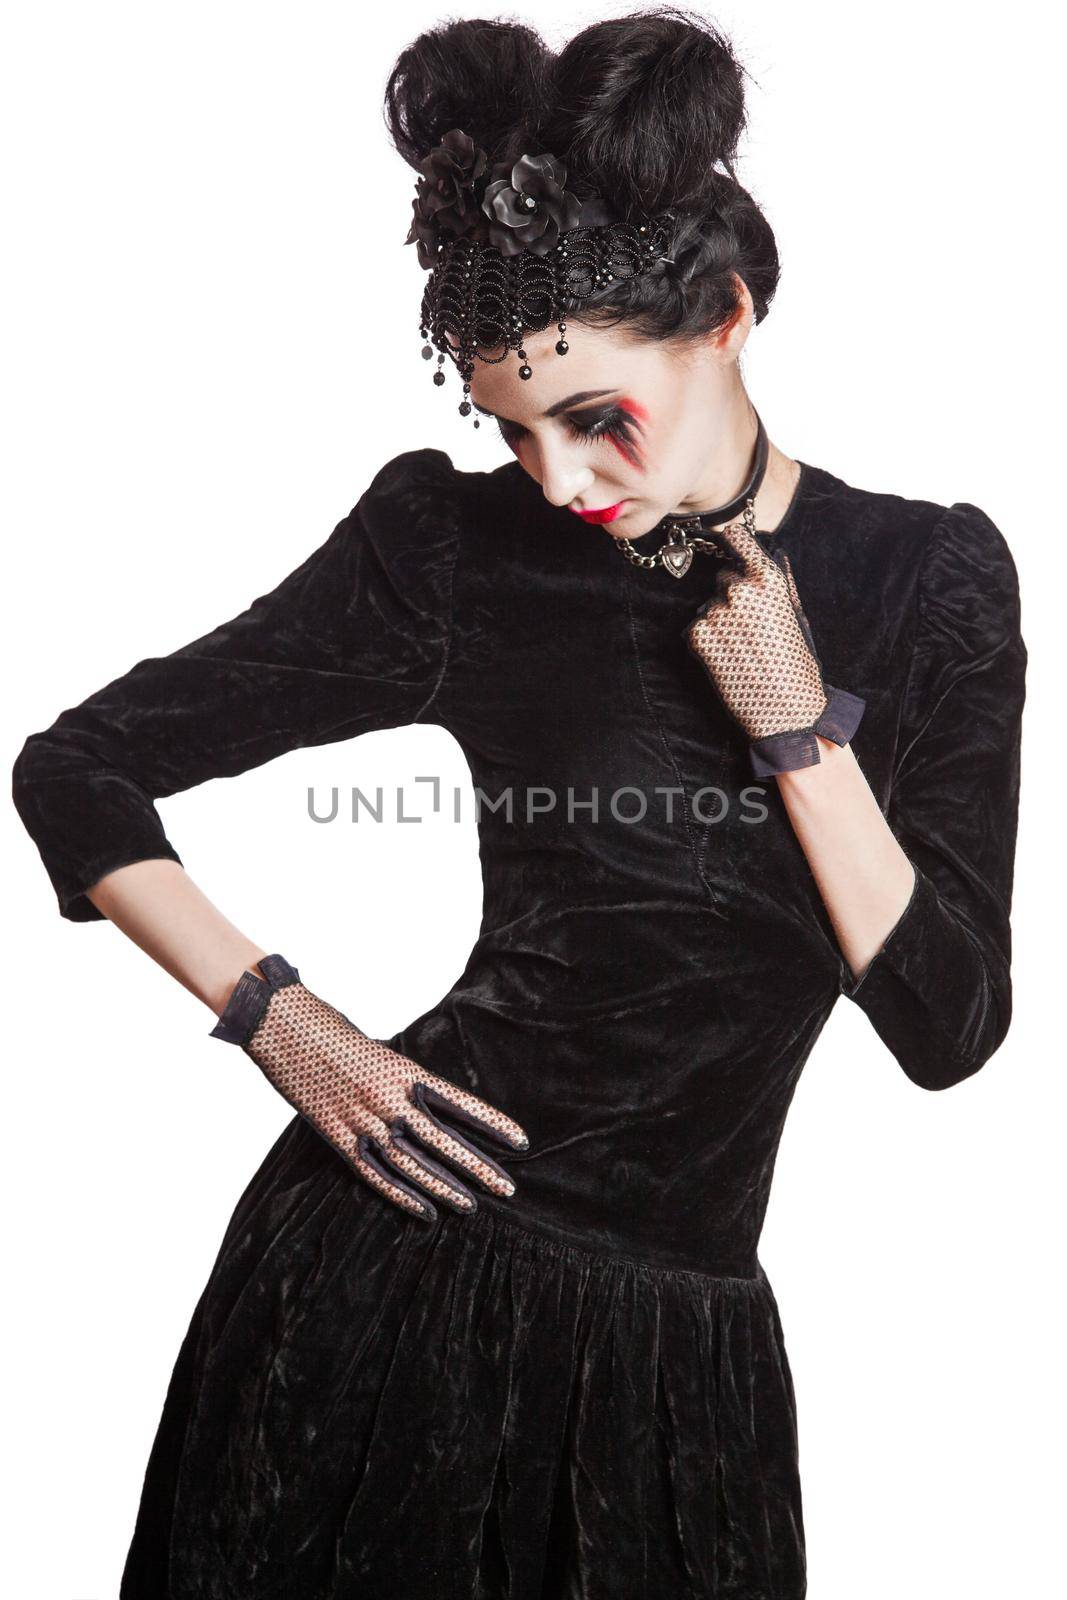 Young beautiful gothic woman with white skin and red lips with bloody drops wearing black collar with spikes. Red smokey eyes. Halloween makeup. by Khosro1